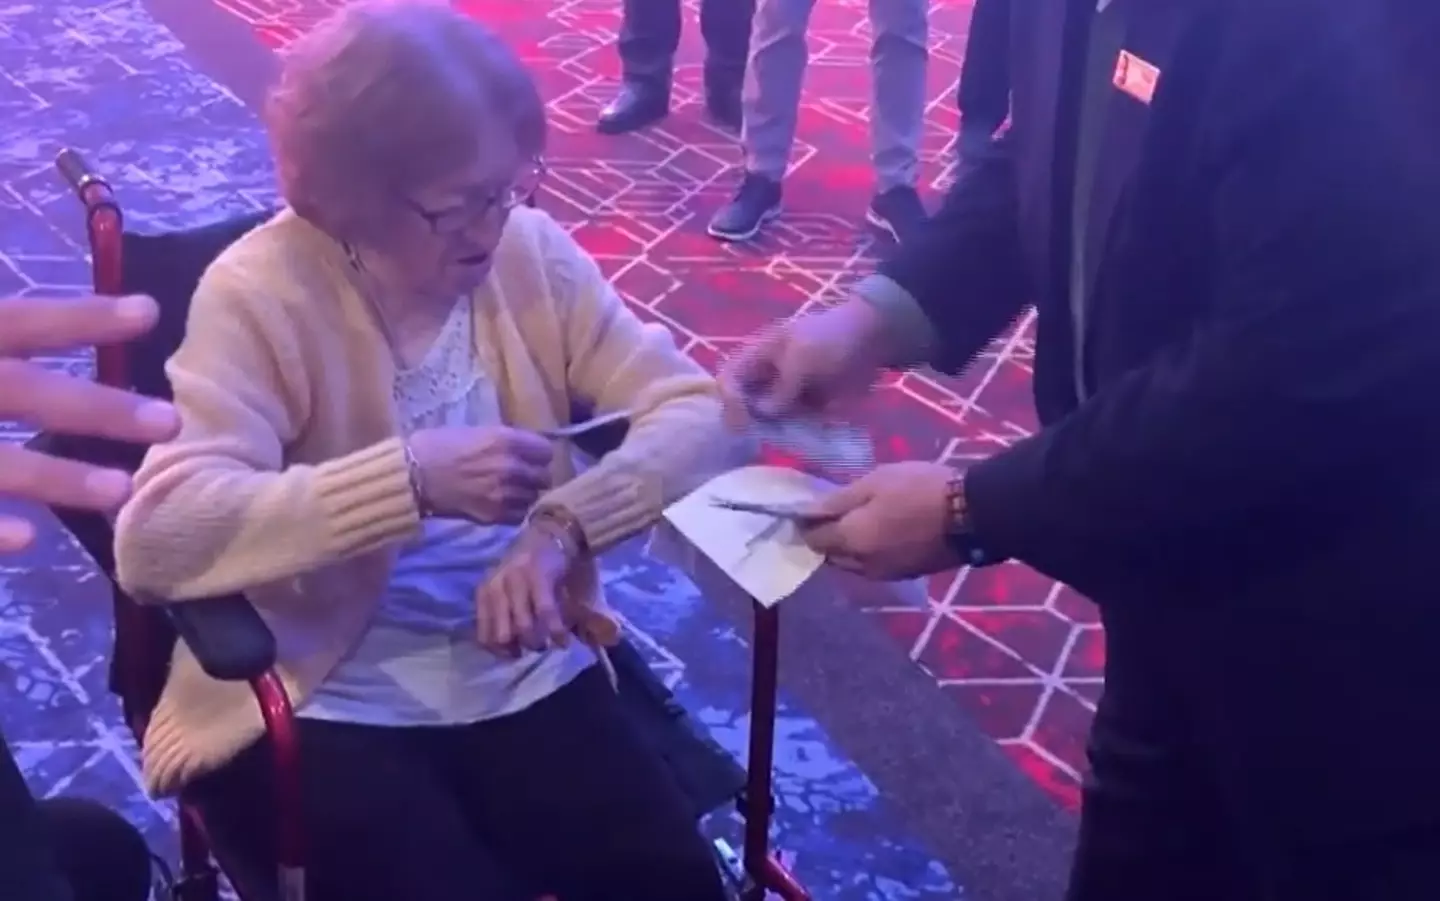 The 106-year-old got her money doubled at the casino.